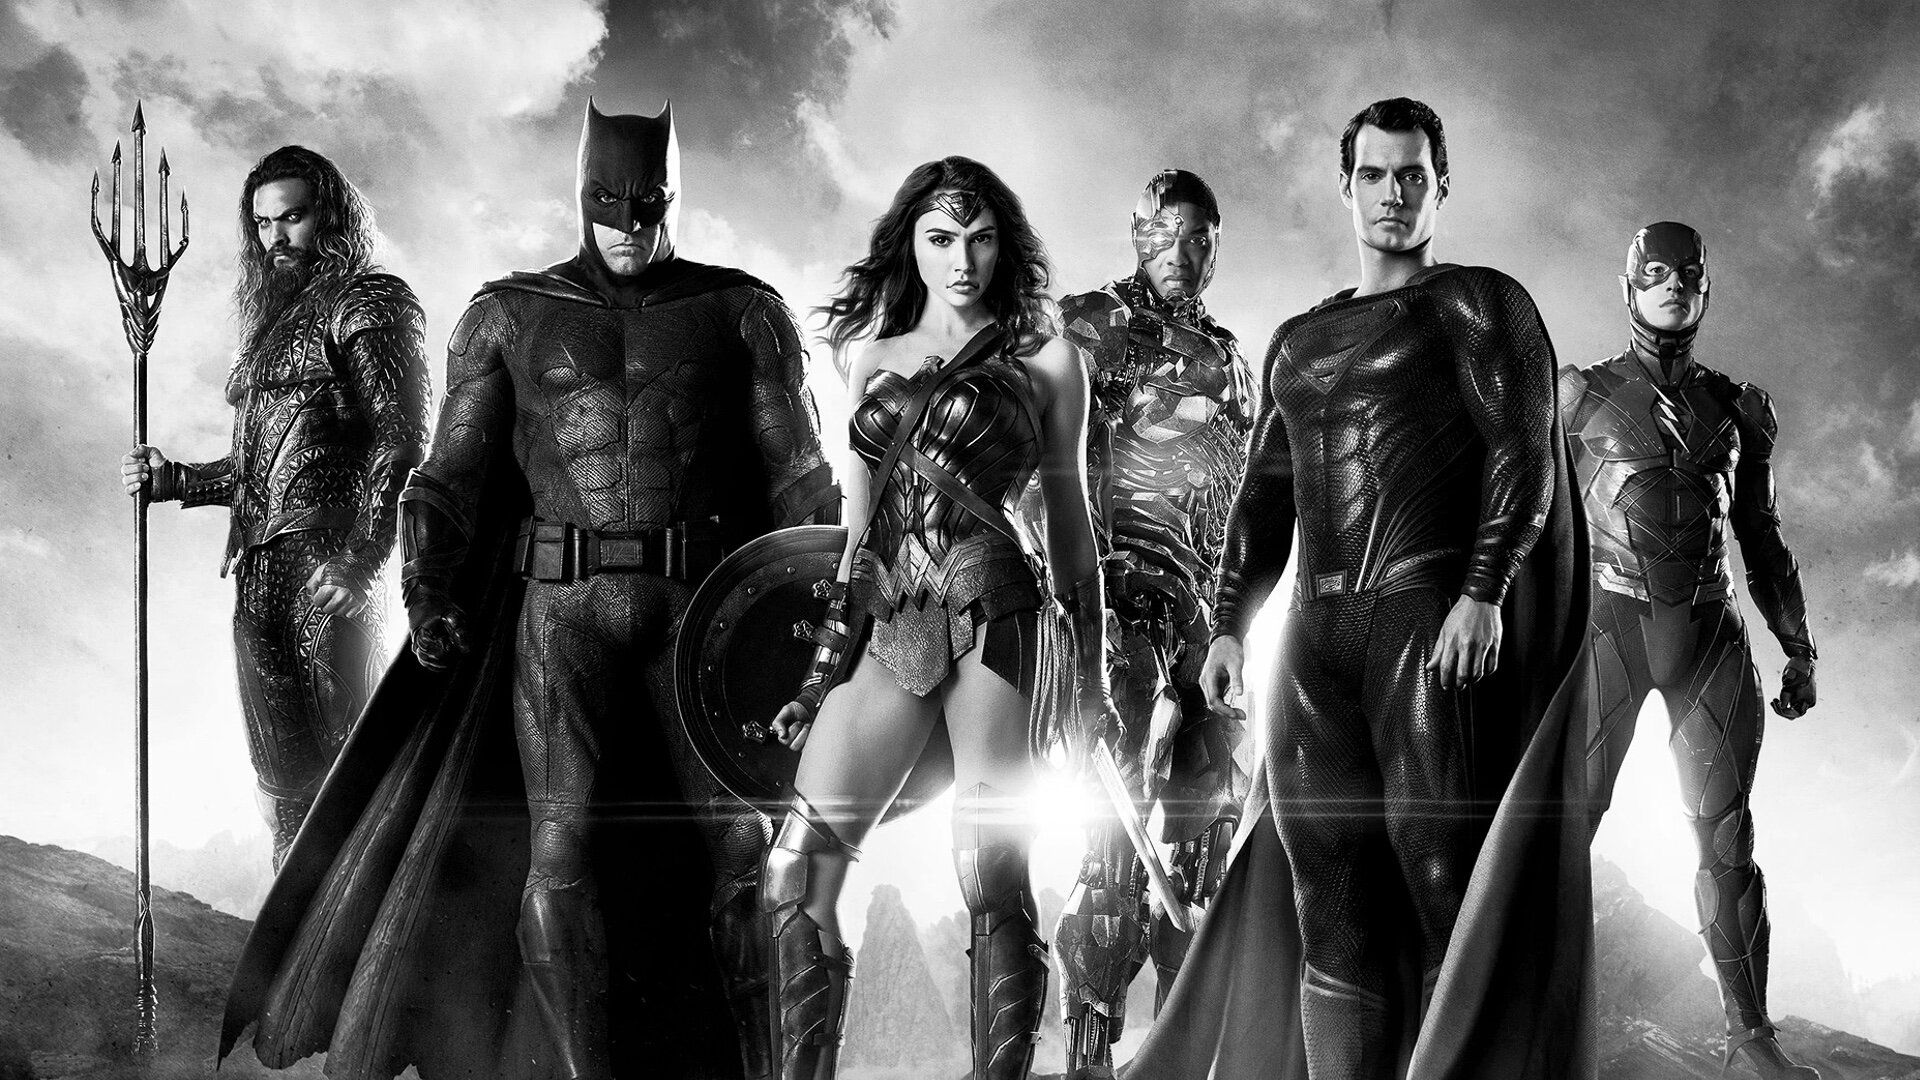 Zack Snyder Shares a New Black and White for JUSTICE LEAGUE